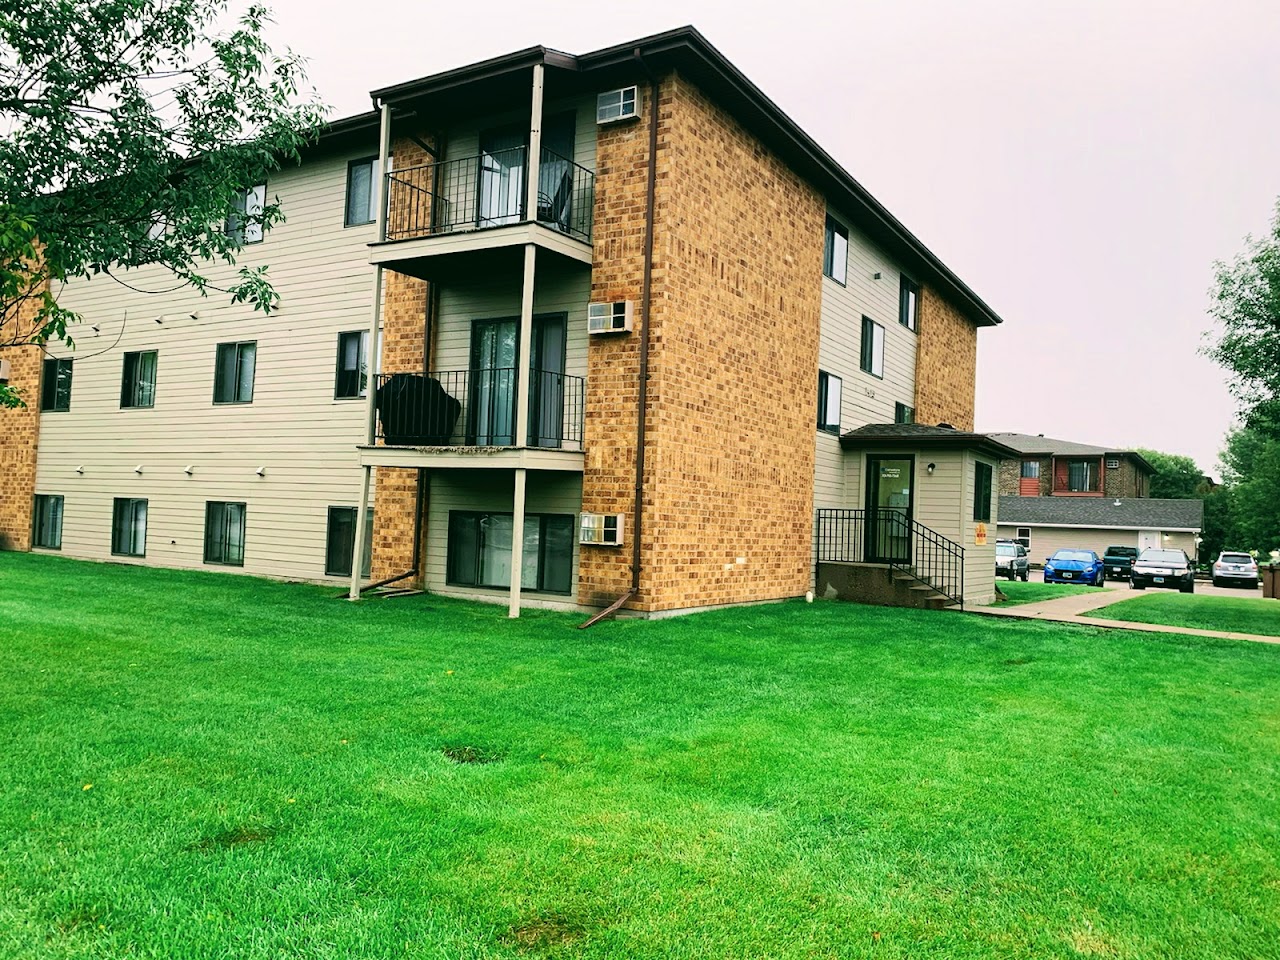 Photo of PRAIRIE WEST APTS IV. Affordable housing located at 1515 14TH AVE E WEST FARGO, ND 58078